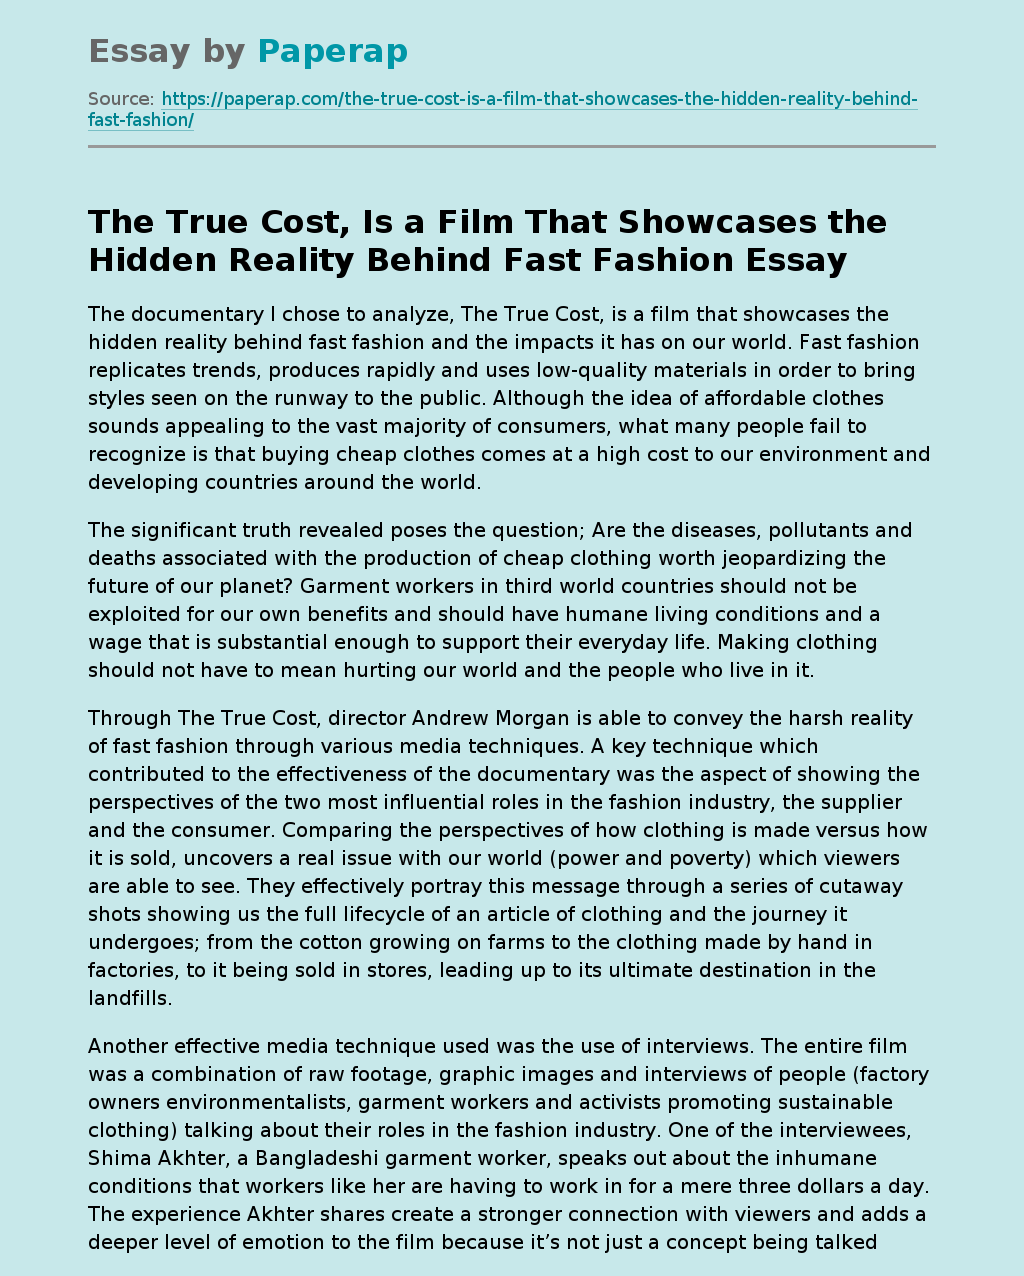 The True Cost, Is a Film That Showcases the Hidden Reality Behind Fast Fashion